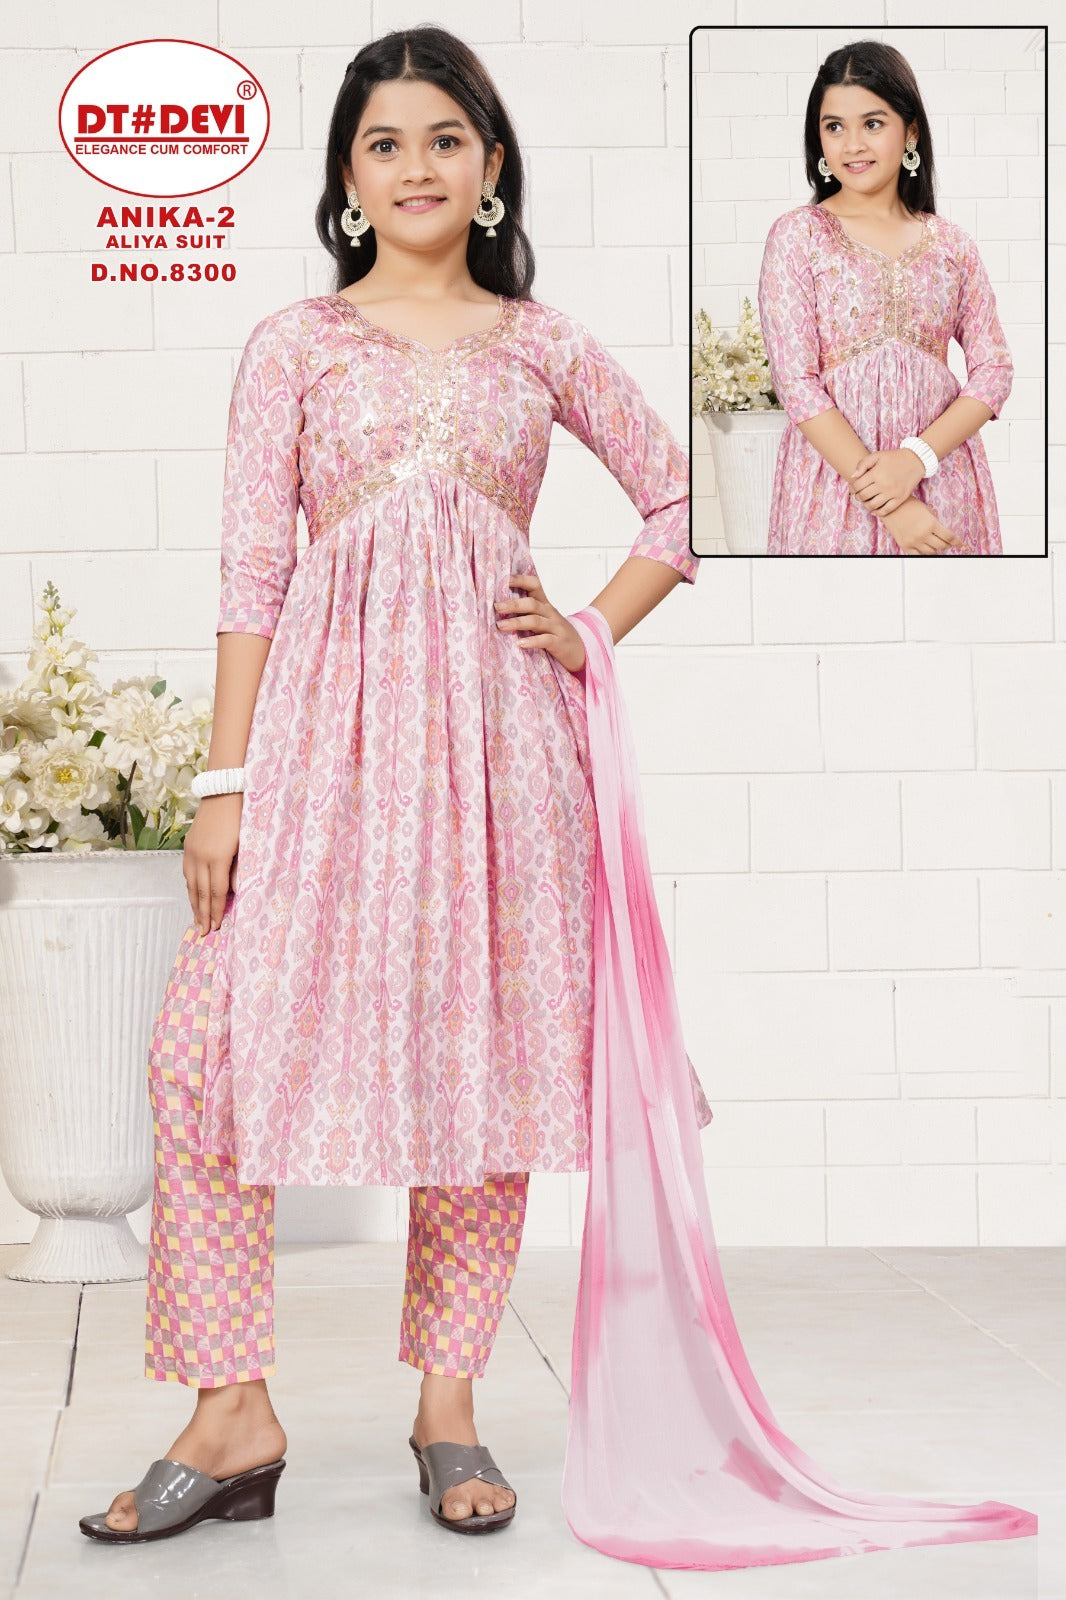 Anika-2 8300 Dt Devi Modal Girls Readymade Pant Suits